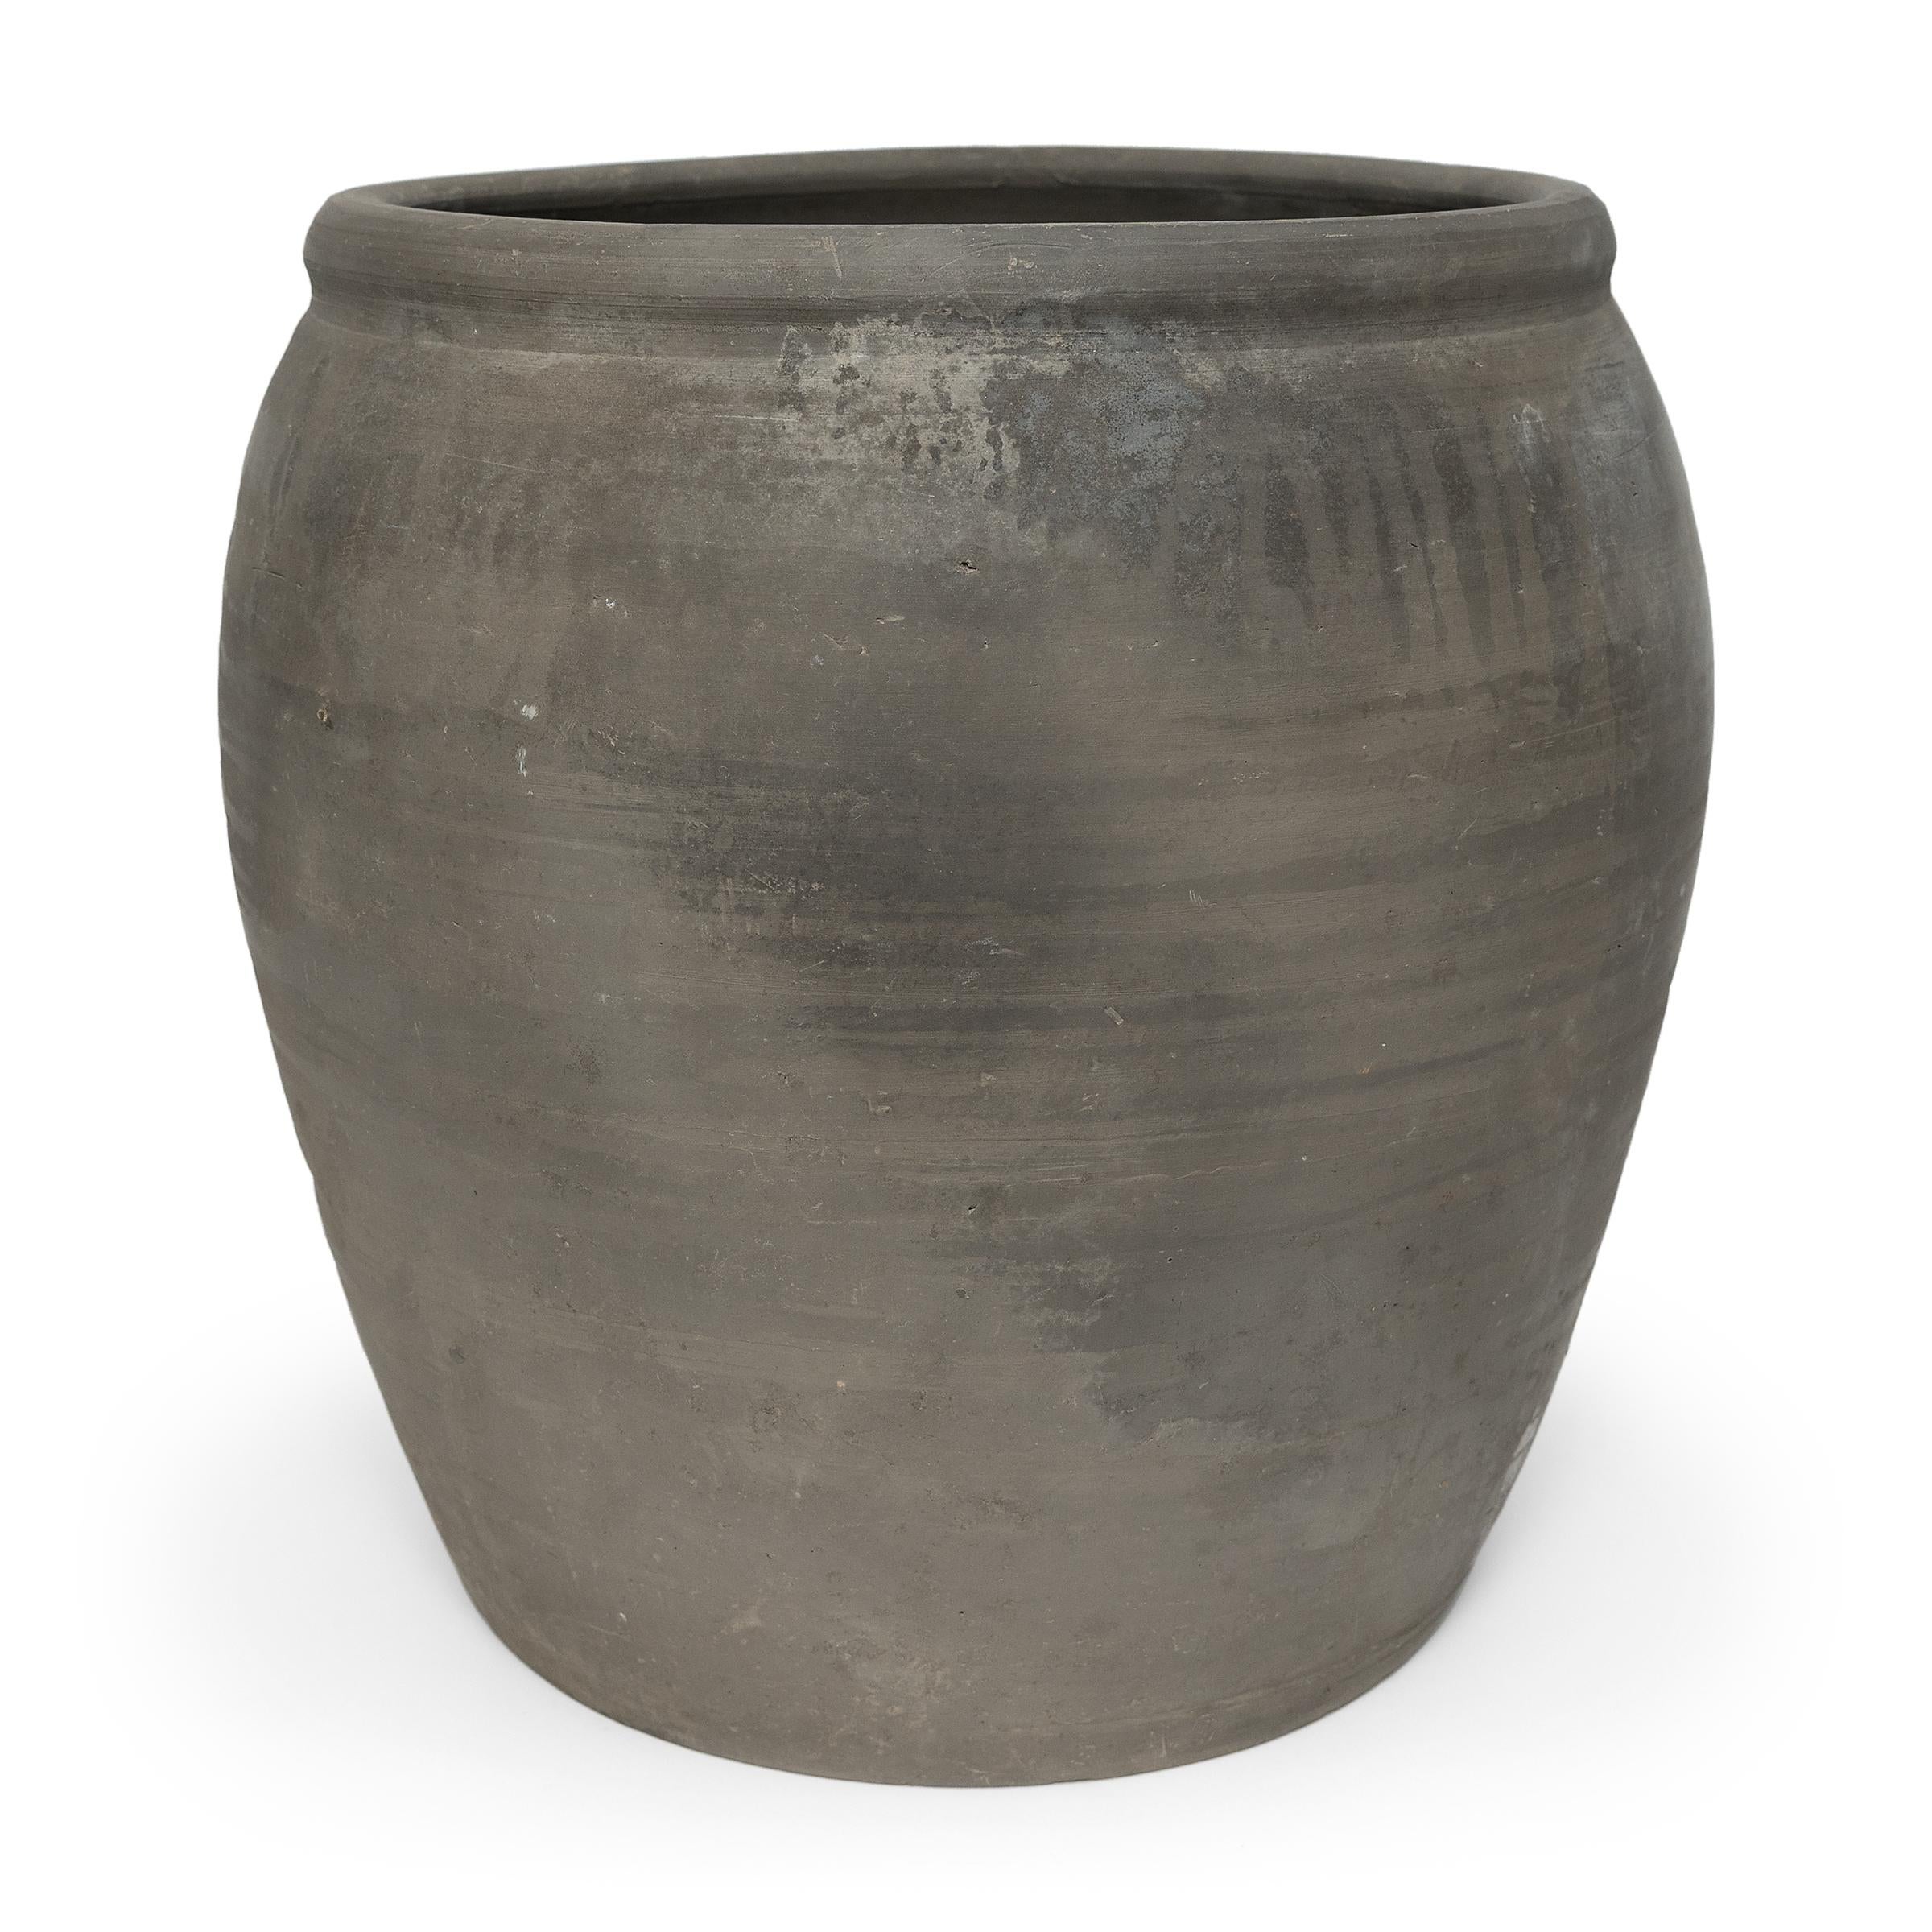 Sculpted by artisans in China's Shanxi province, this black clay vessel has a quiet simplicity, shaped with balanced proportions and an undecorated, unglazed surface. Charged with the humble task of storing dry goods, the earthenware jar has a wide